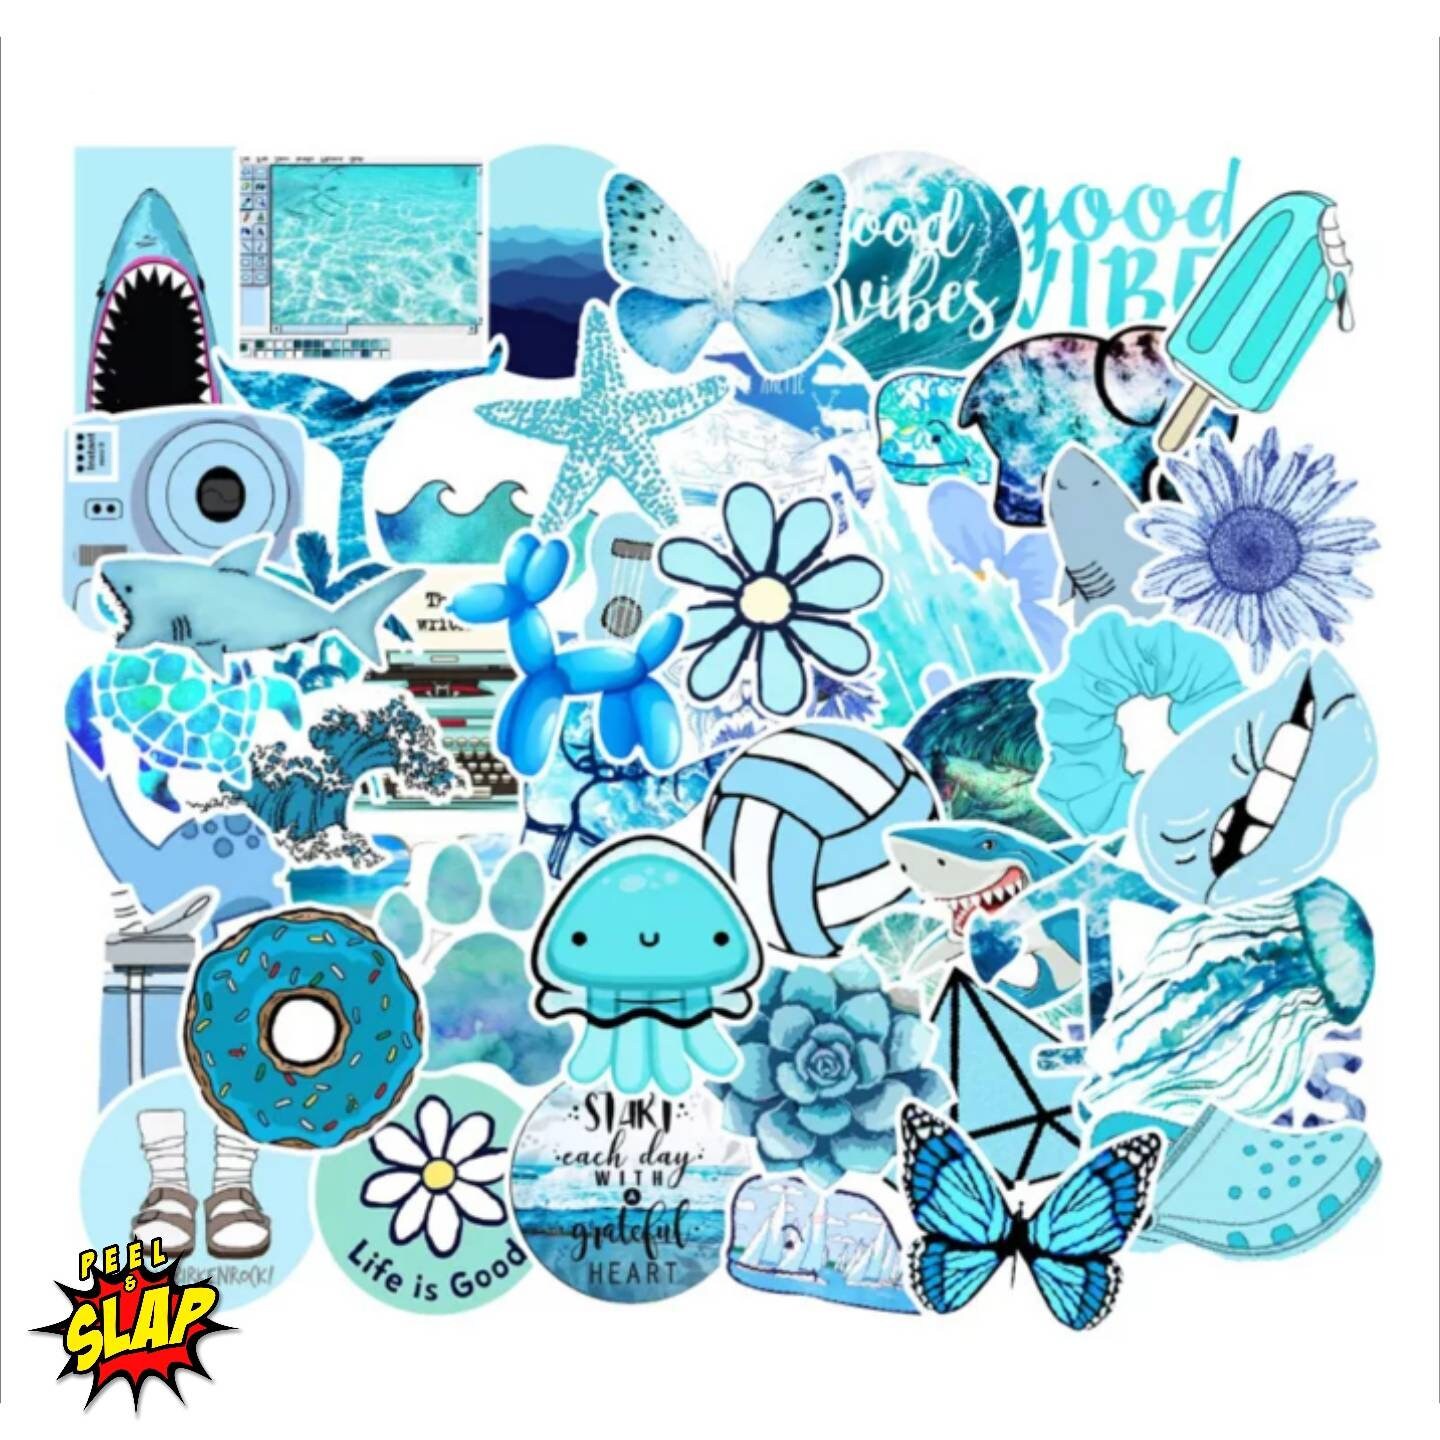 50 Pcs Crystal Stickers Aesthetic Crystal Decals for Water Bottle Hydro  Flask Laptop Luggage Car Bike Bicycle Vinyl Waterproof Stickers Pack